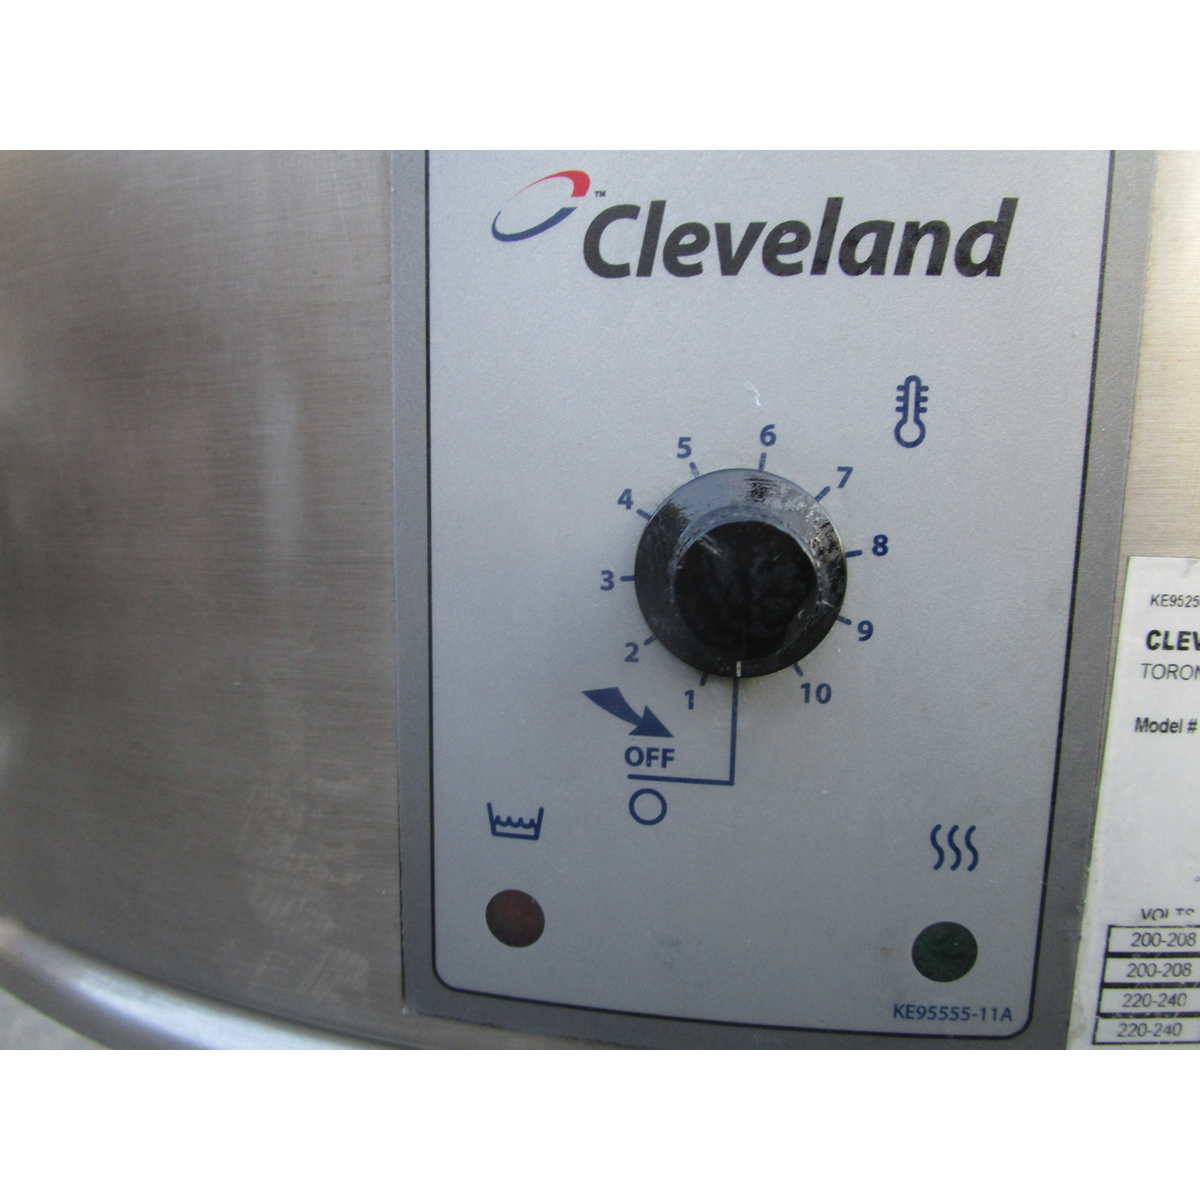 Cleveland KEL60 Electric Kettle, Used Excellent Condition image 2